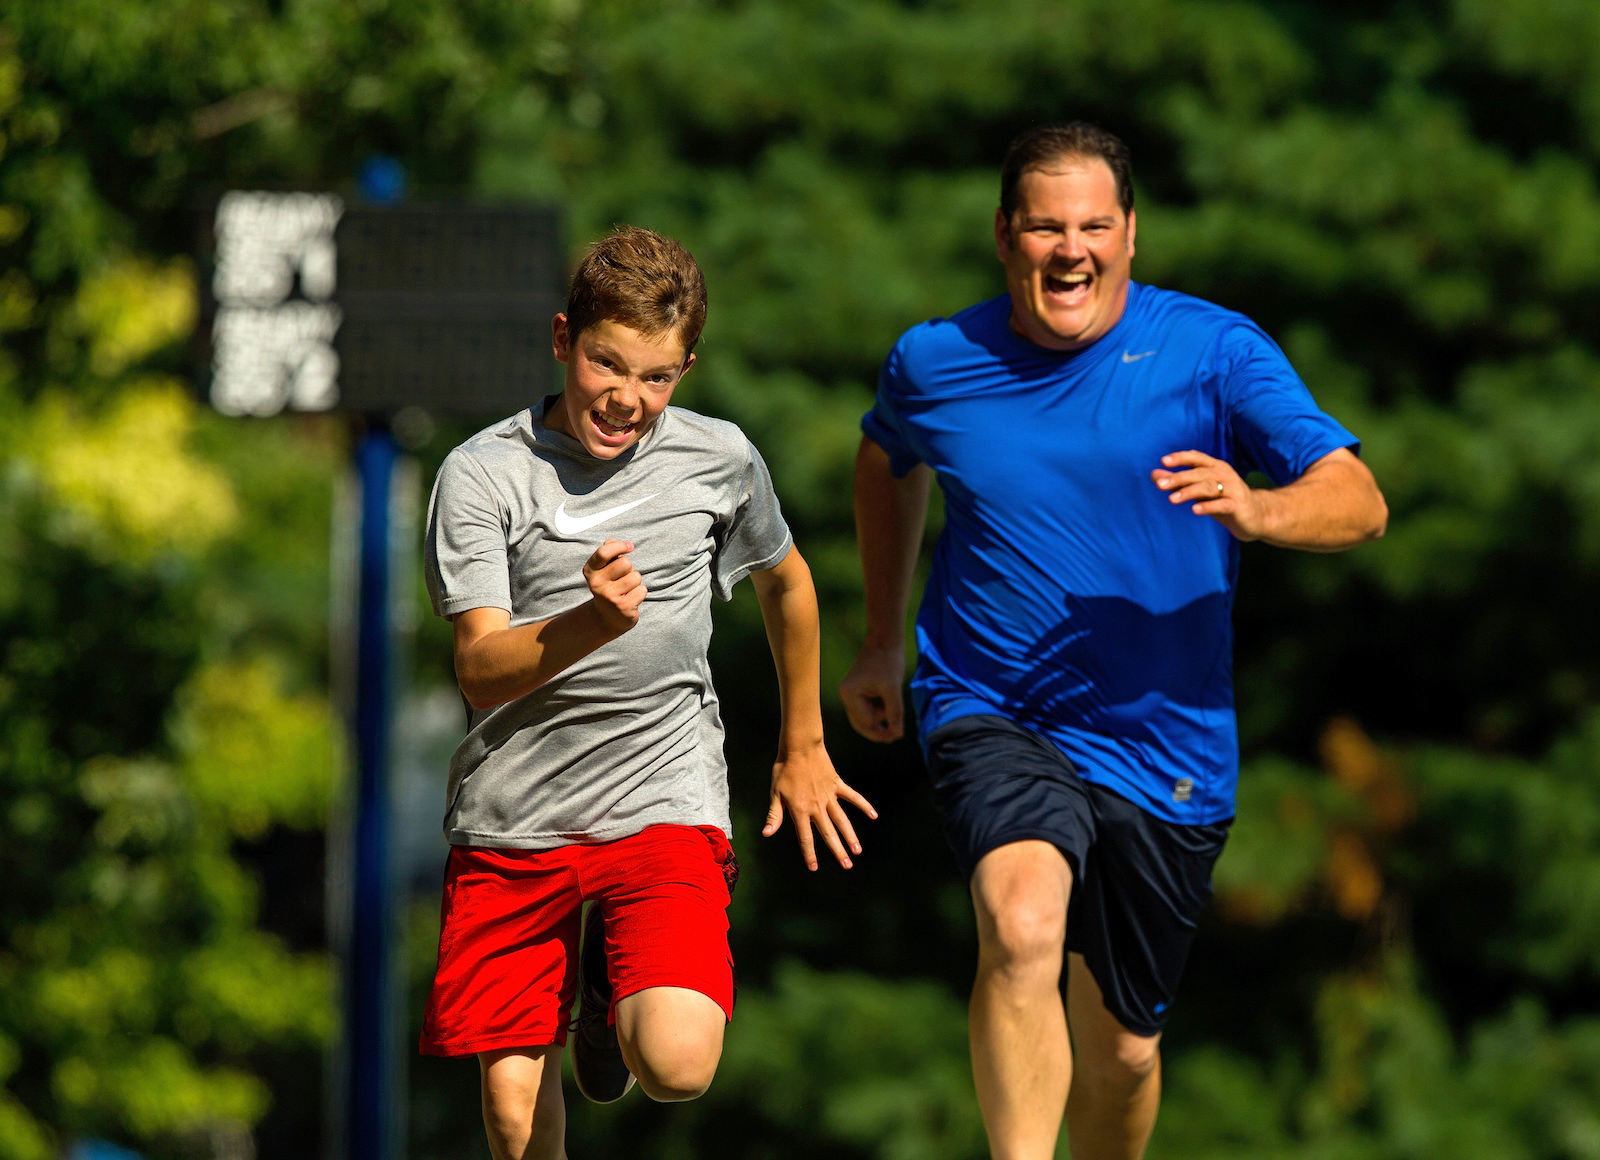 Timed 40-Yard Dash is a fun way for friends and family to compete.